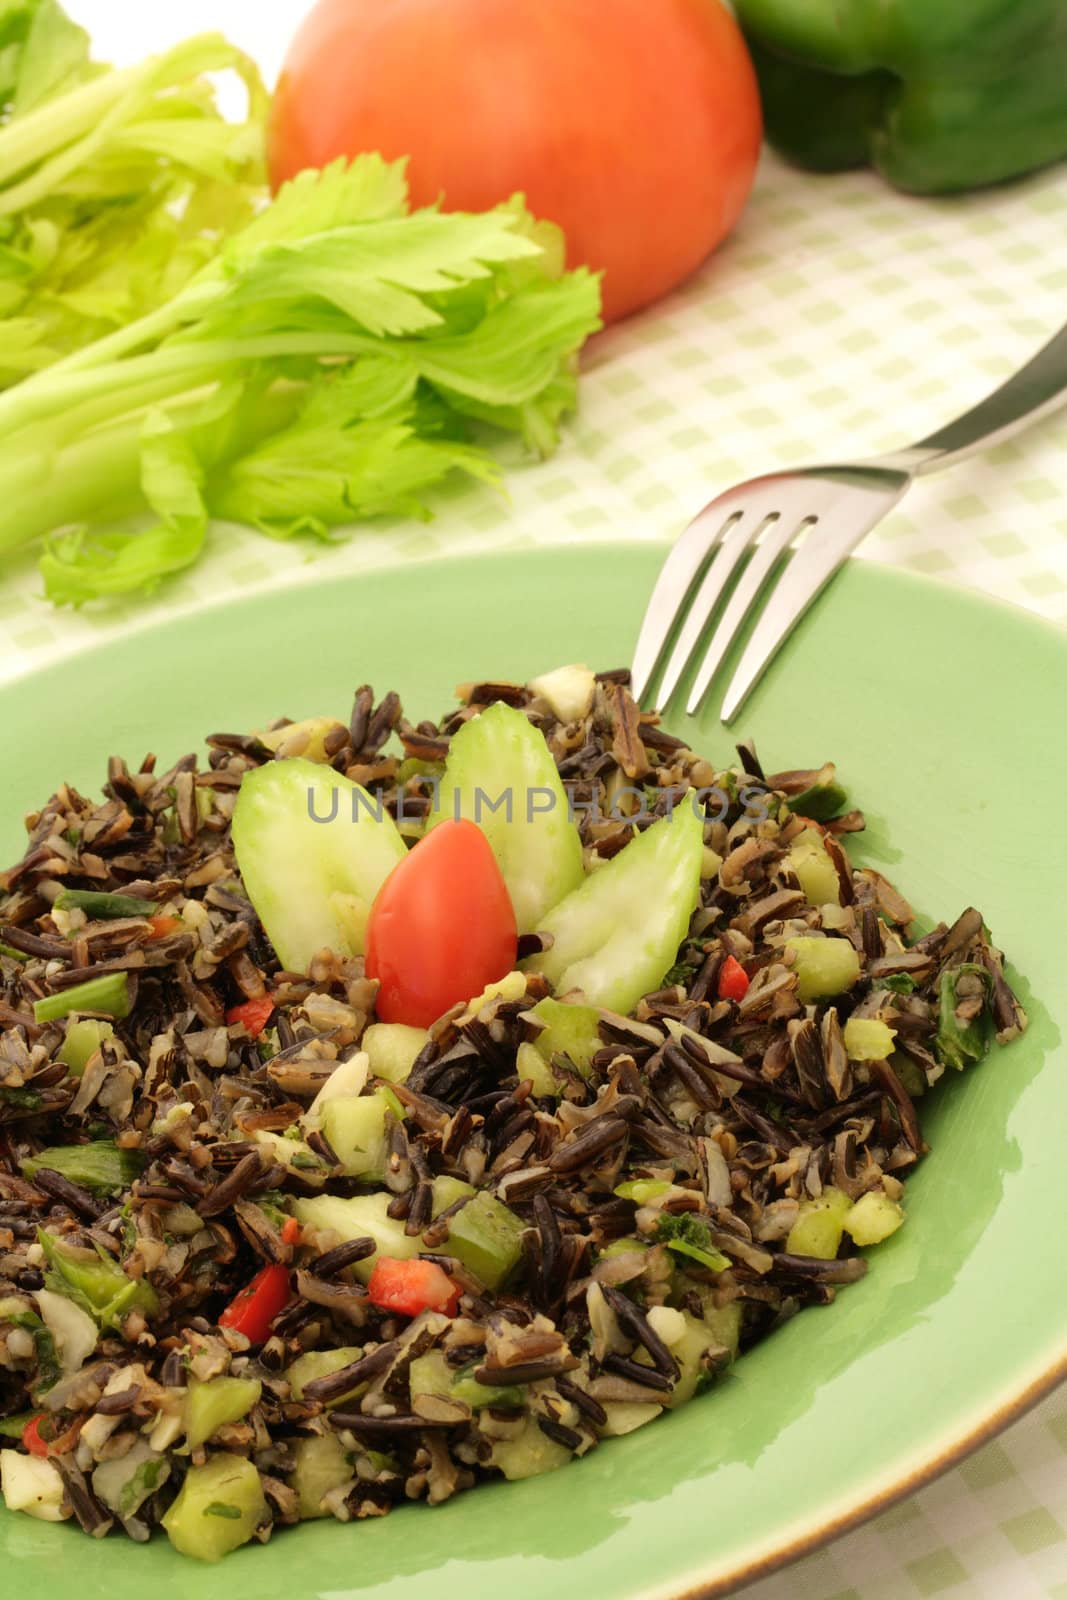 Healthy wild rice salad served on a green plate